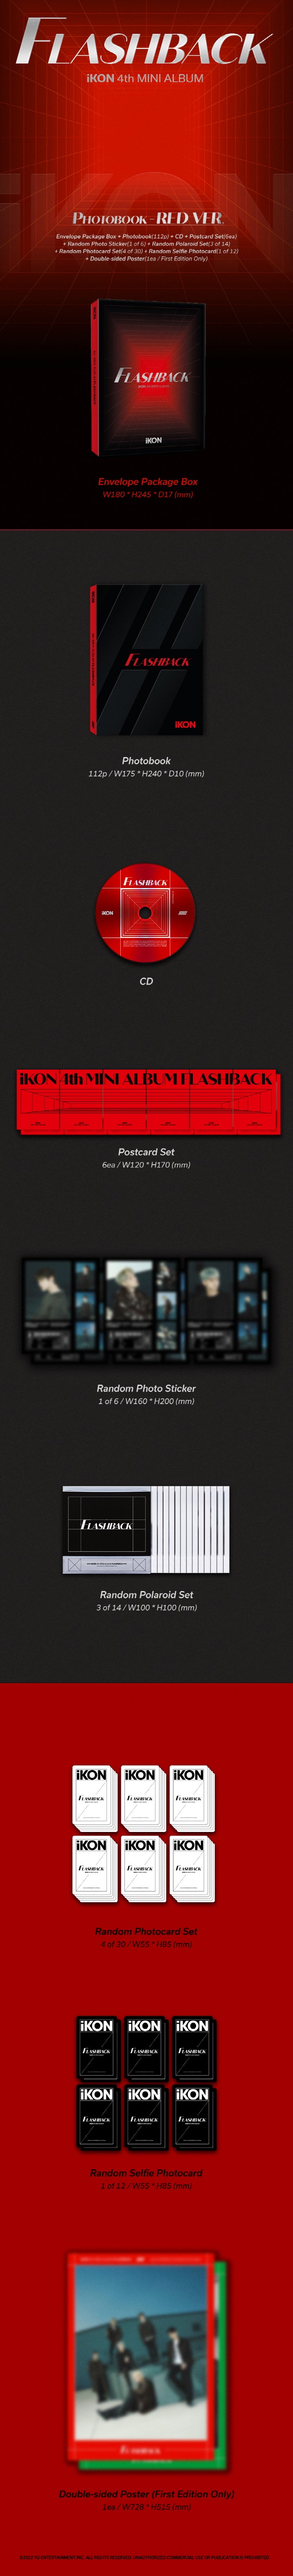 1 CD
1 Photo Book (112 pages)
1 Postcard Set (6 cards)
1 Photo Sticker (random out of 6 types)
1 Polaroid Set (4 out of 28...